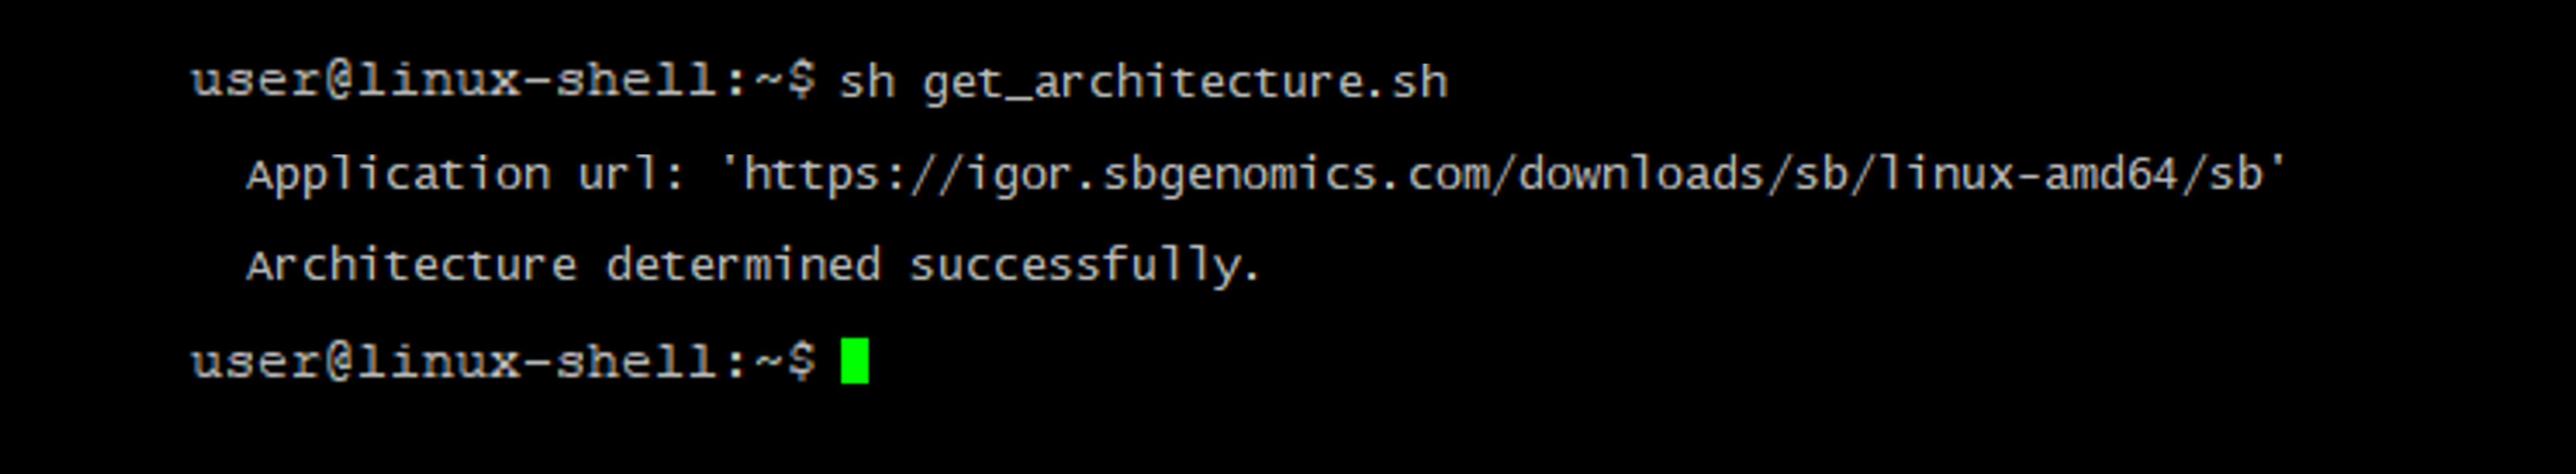 example of command output with URL for the installer determined by the script